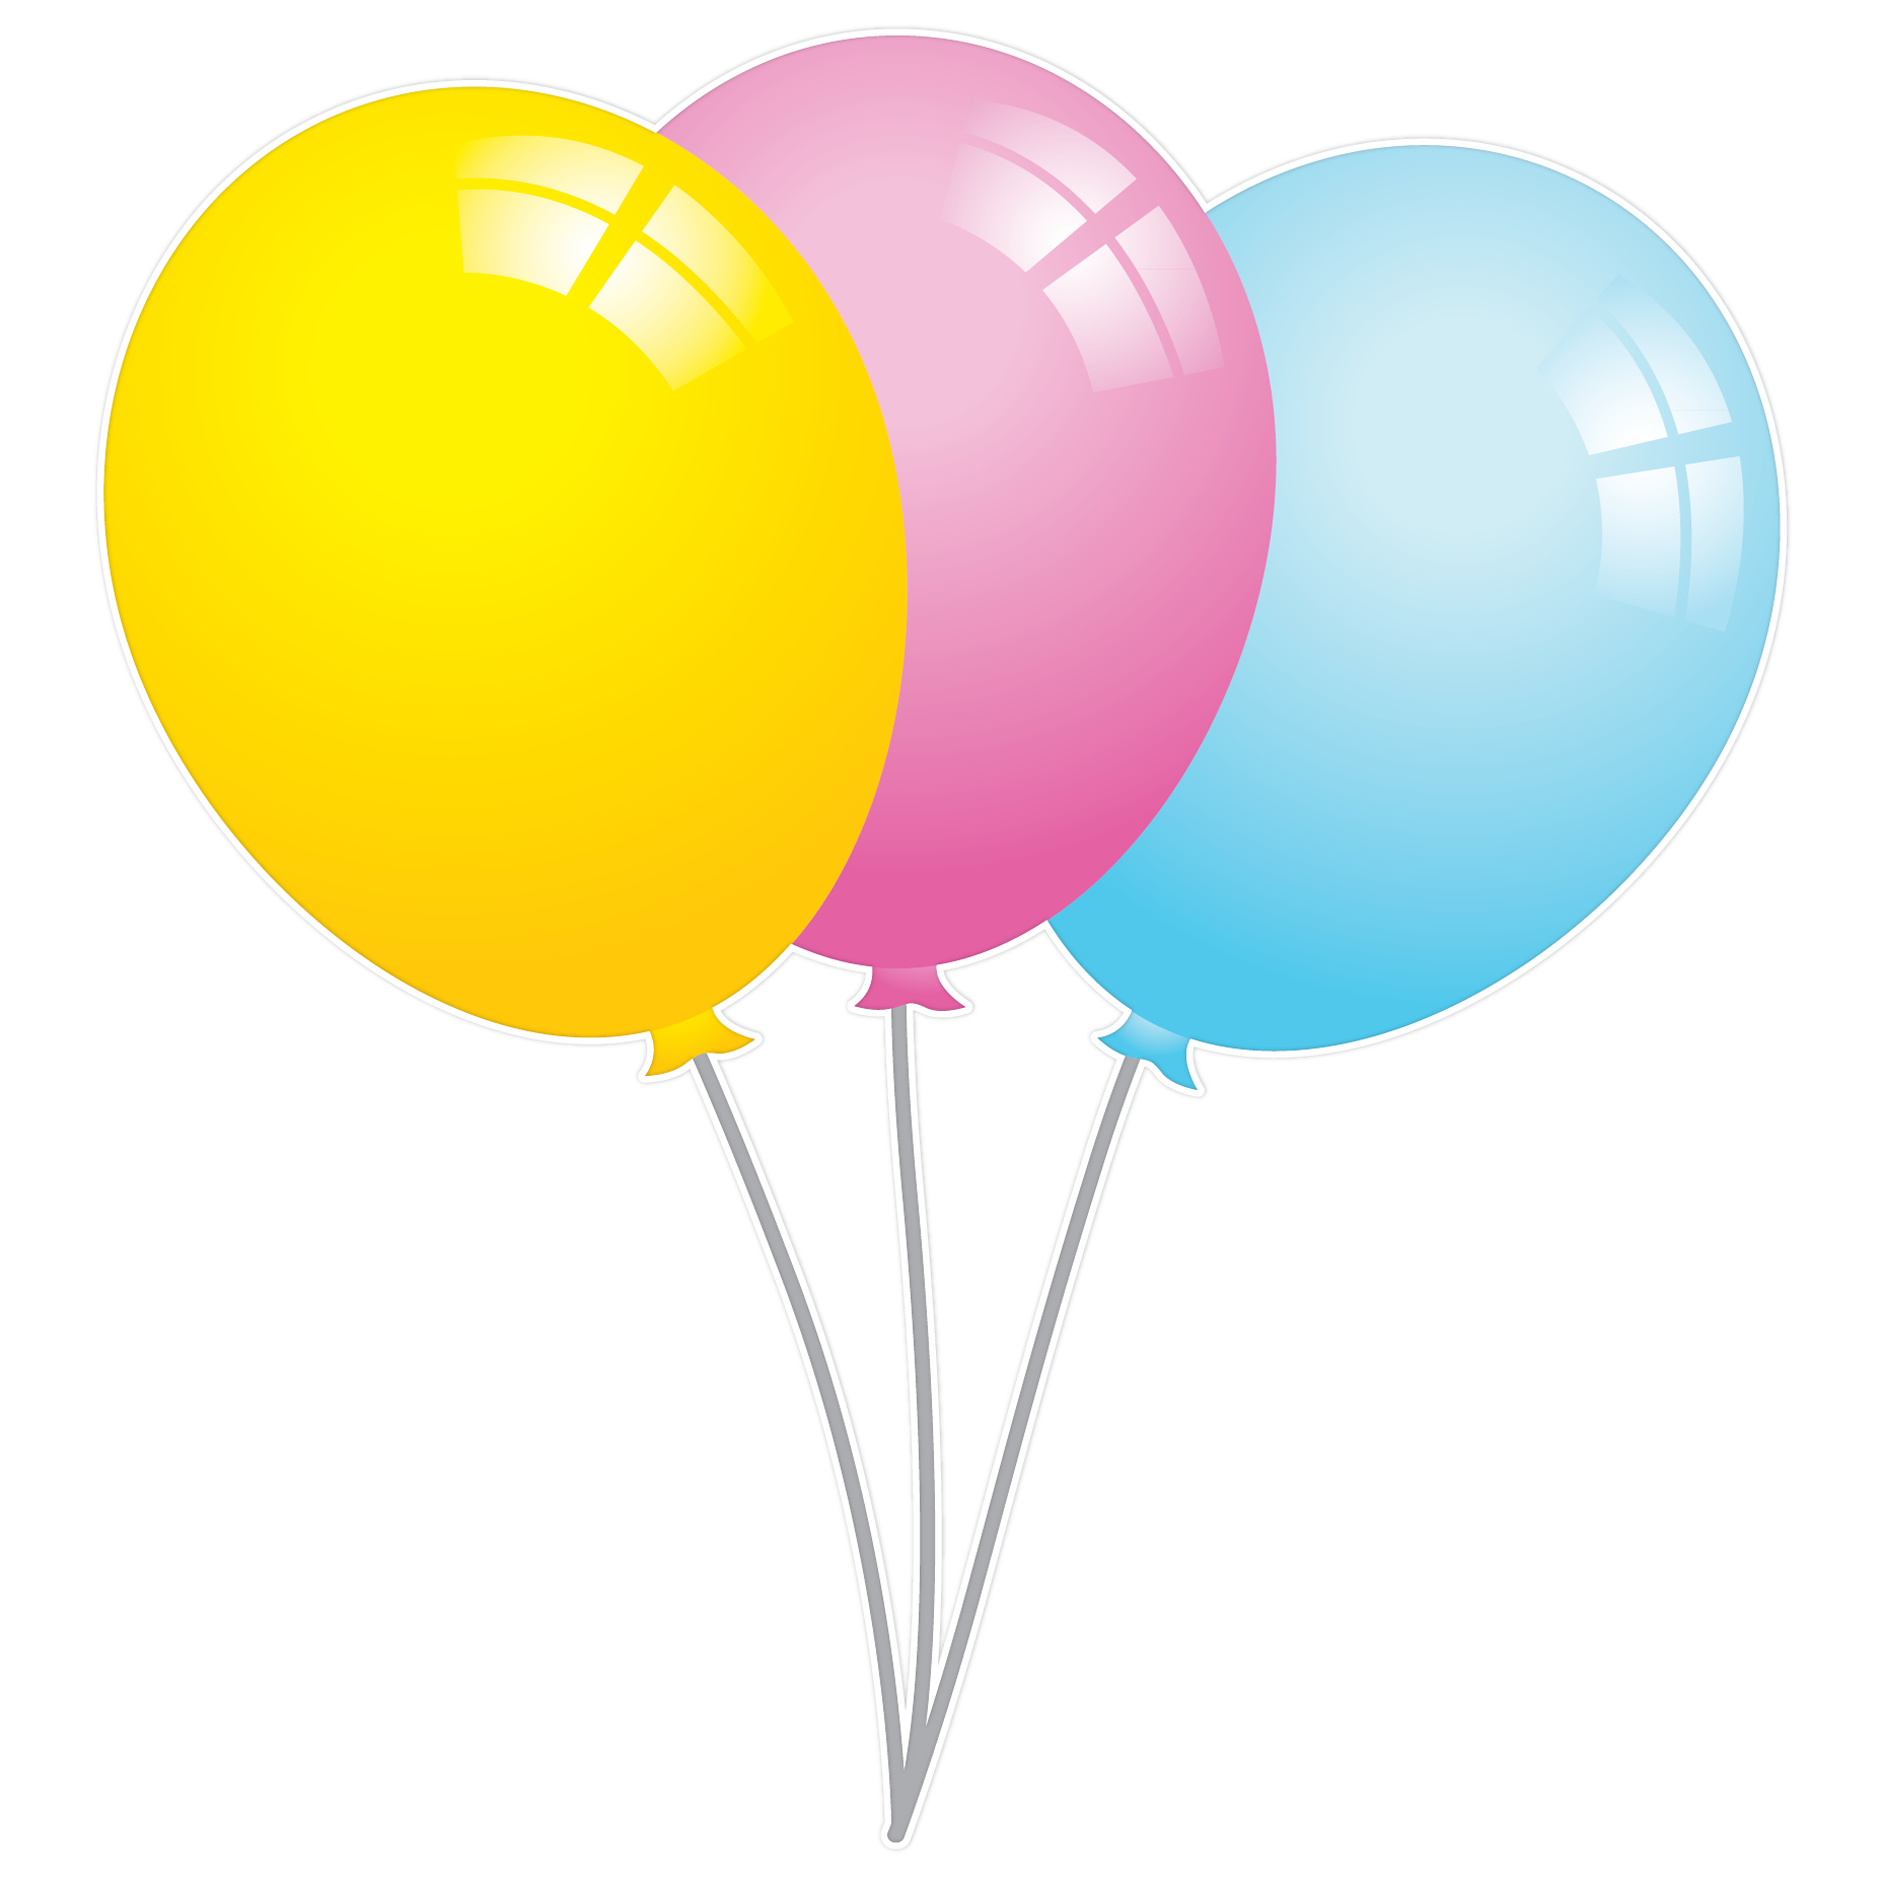 Happy Birthday Balloons Png - ClipArt Best